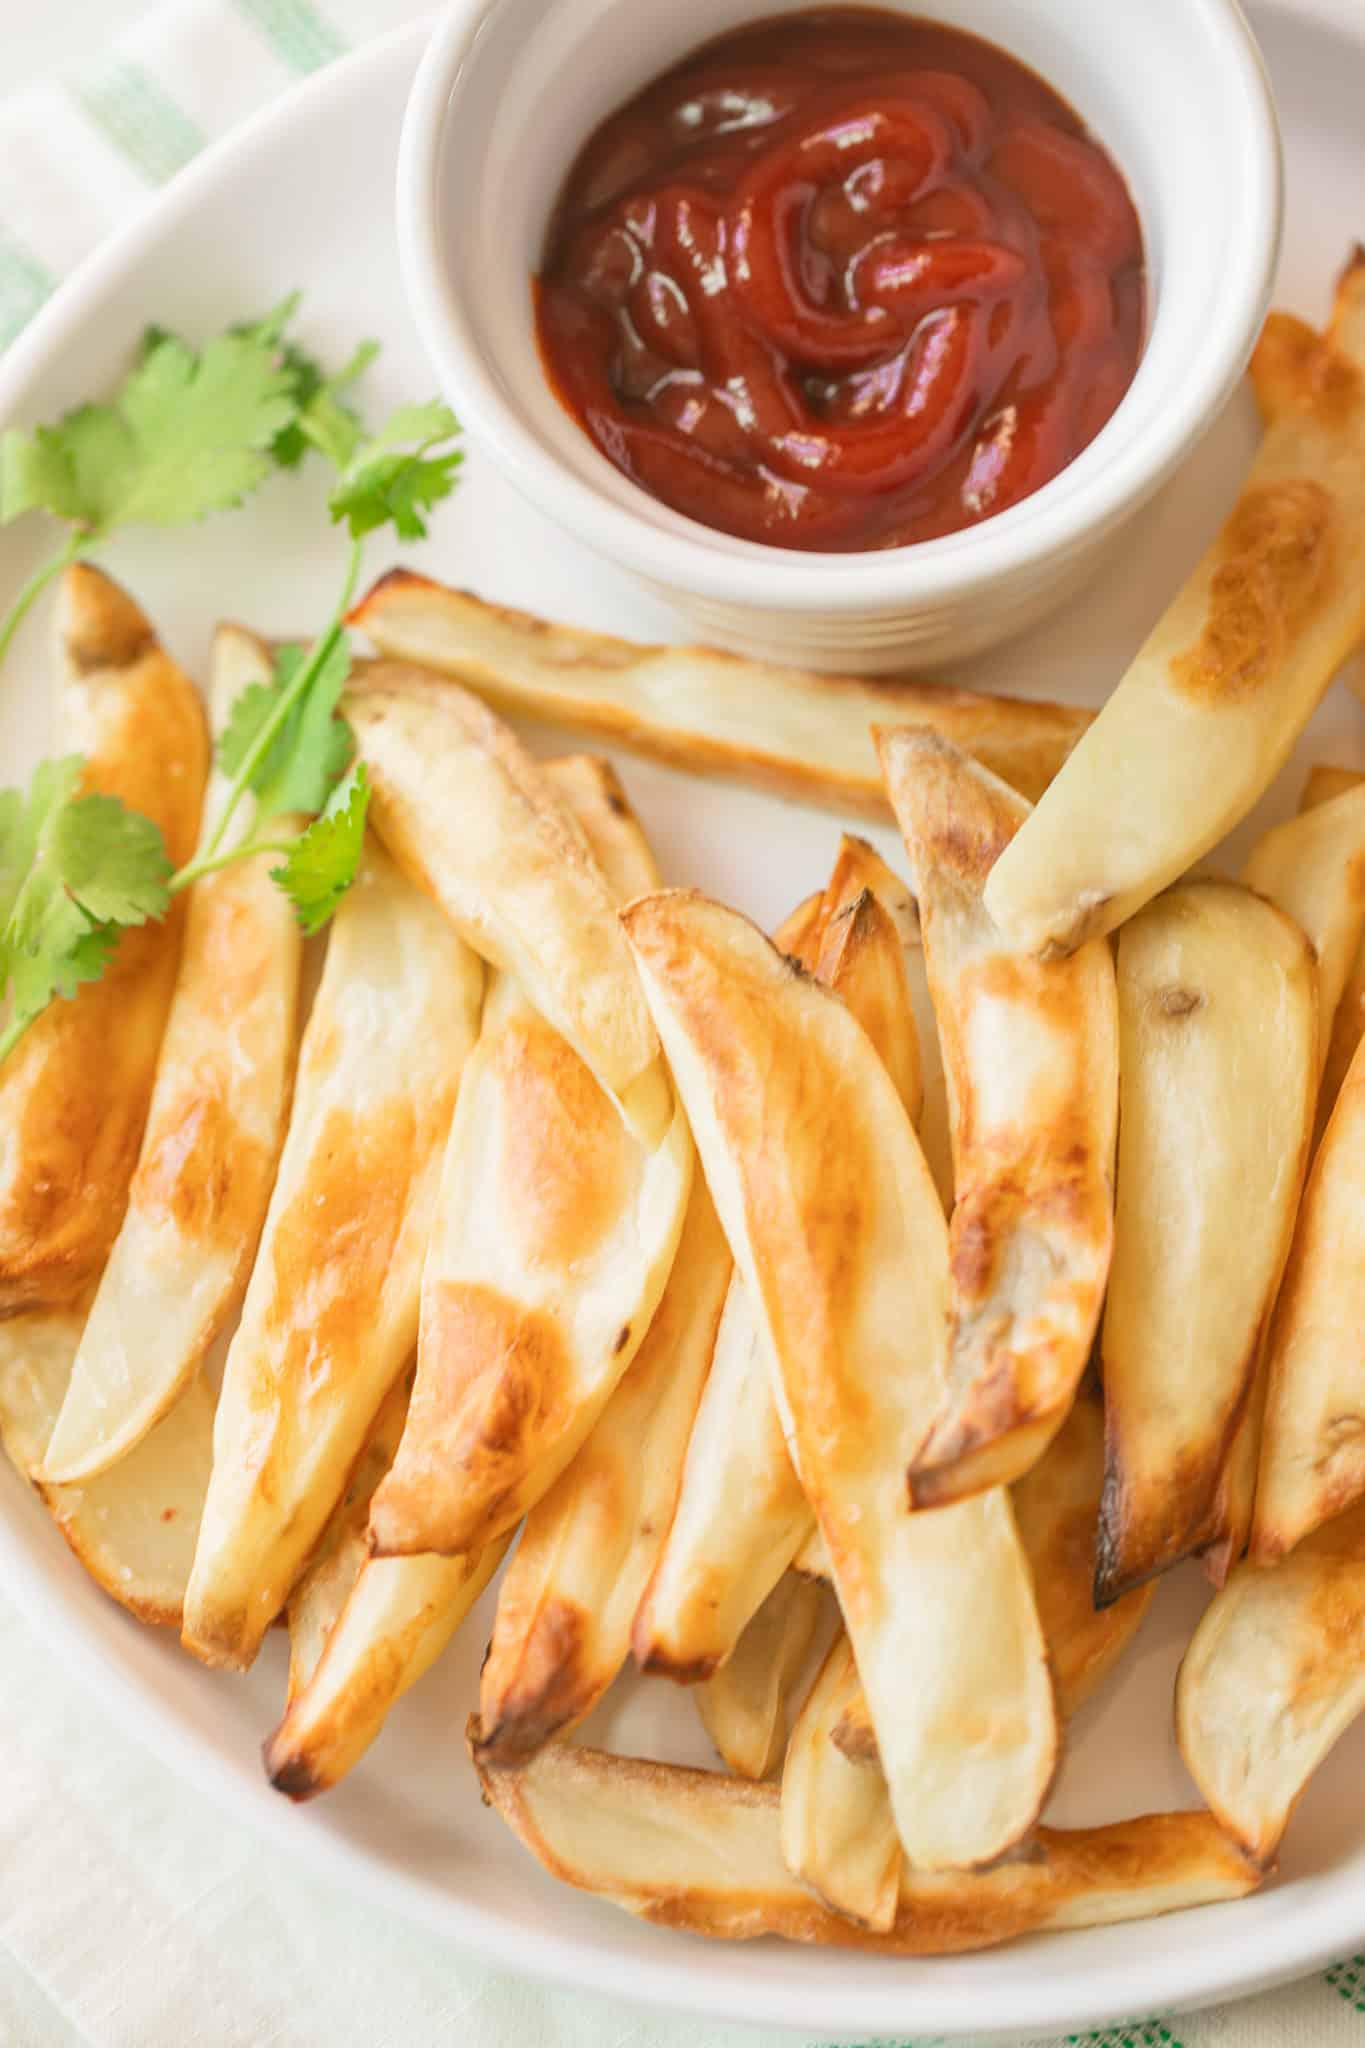 Healthy Baked French Fries (Oil-Free!) - Clean Eating Kitchen